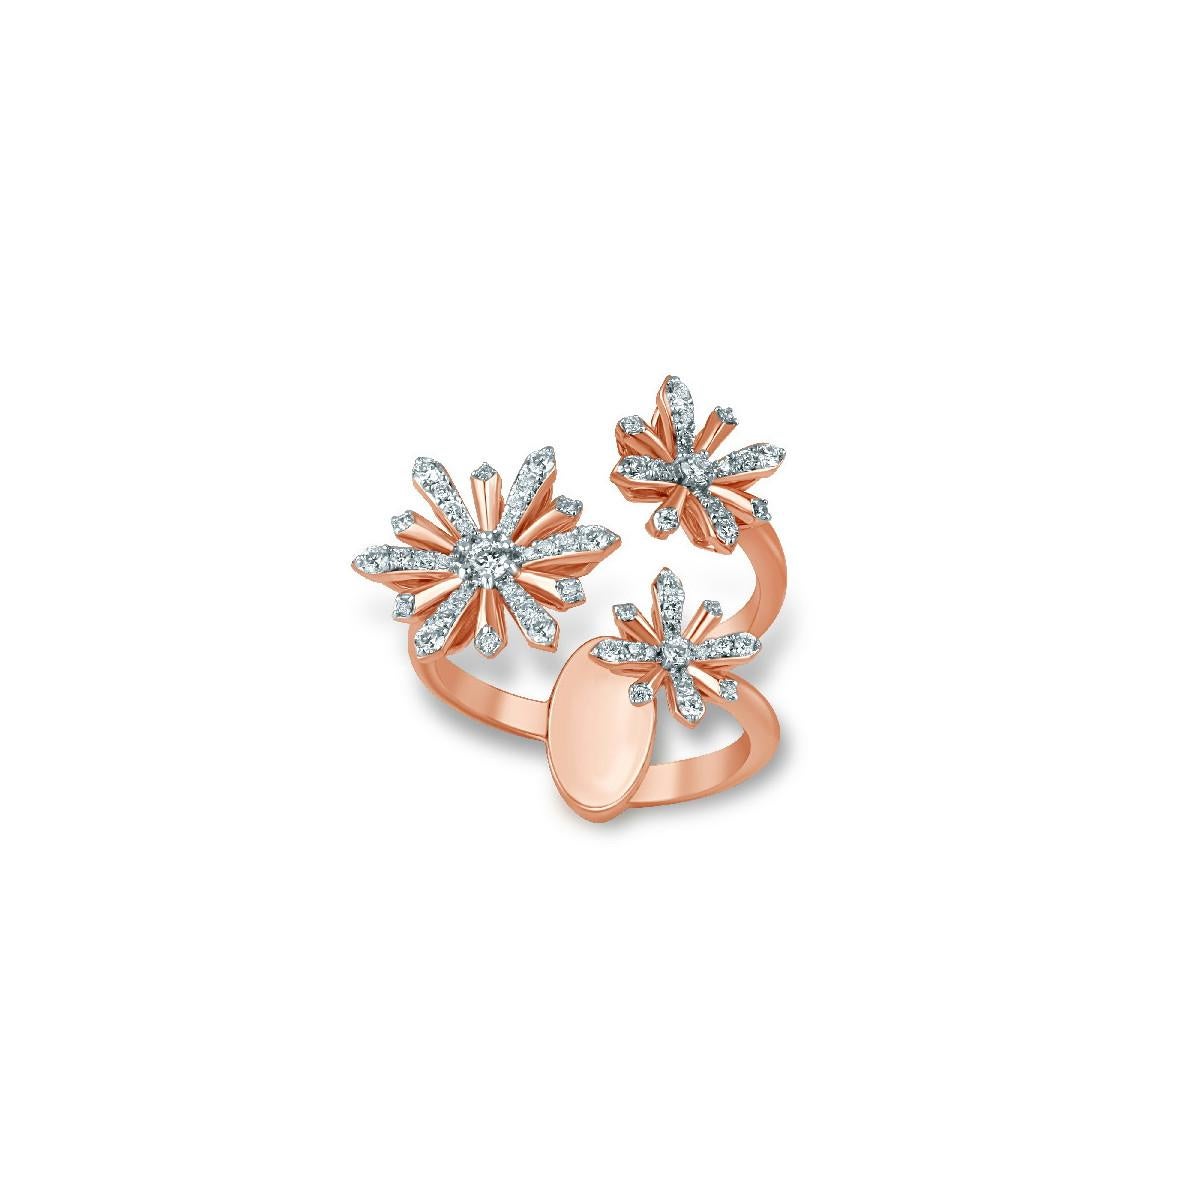 Rose Gold and Diamond Ring with Central Sunshine Edelweiss Medallion For Sale 2